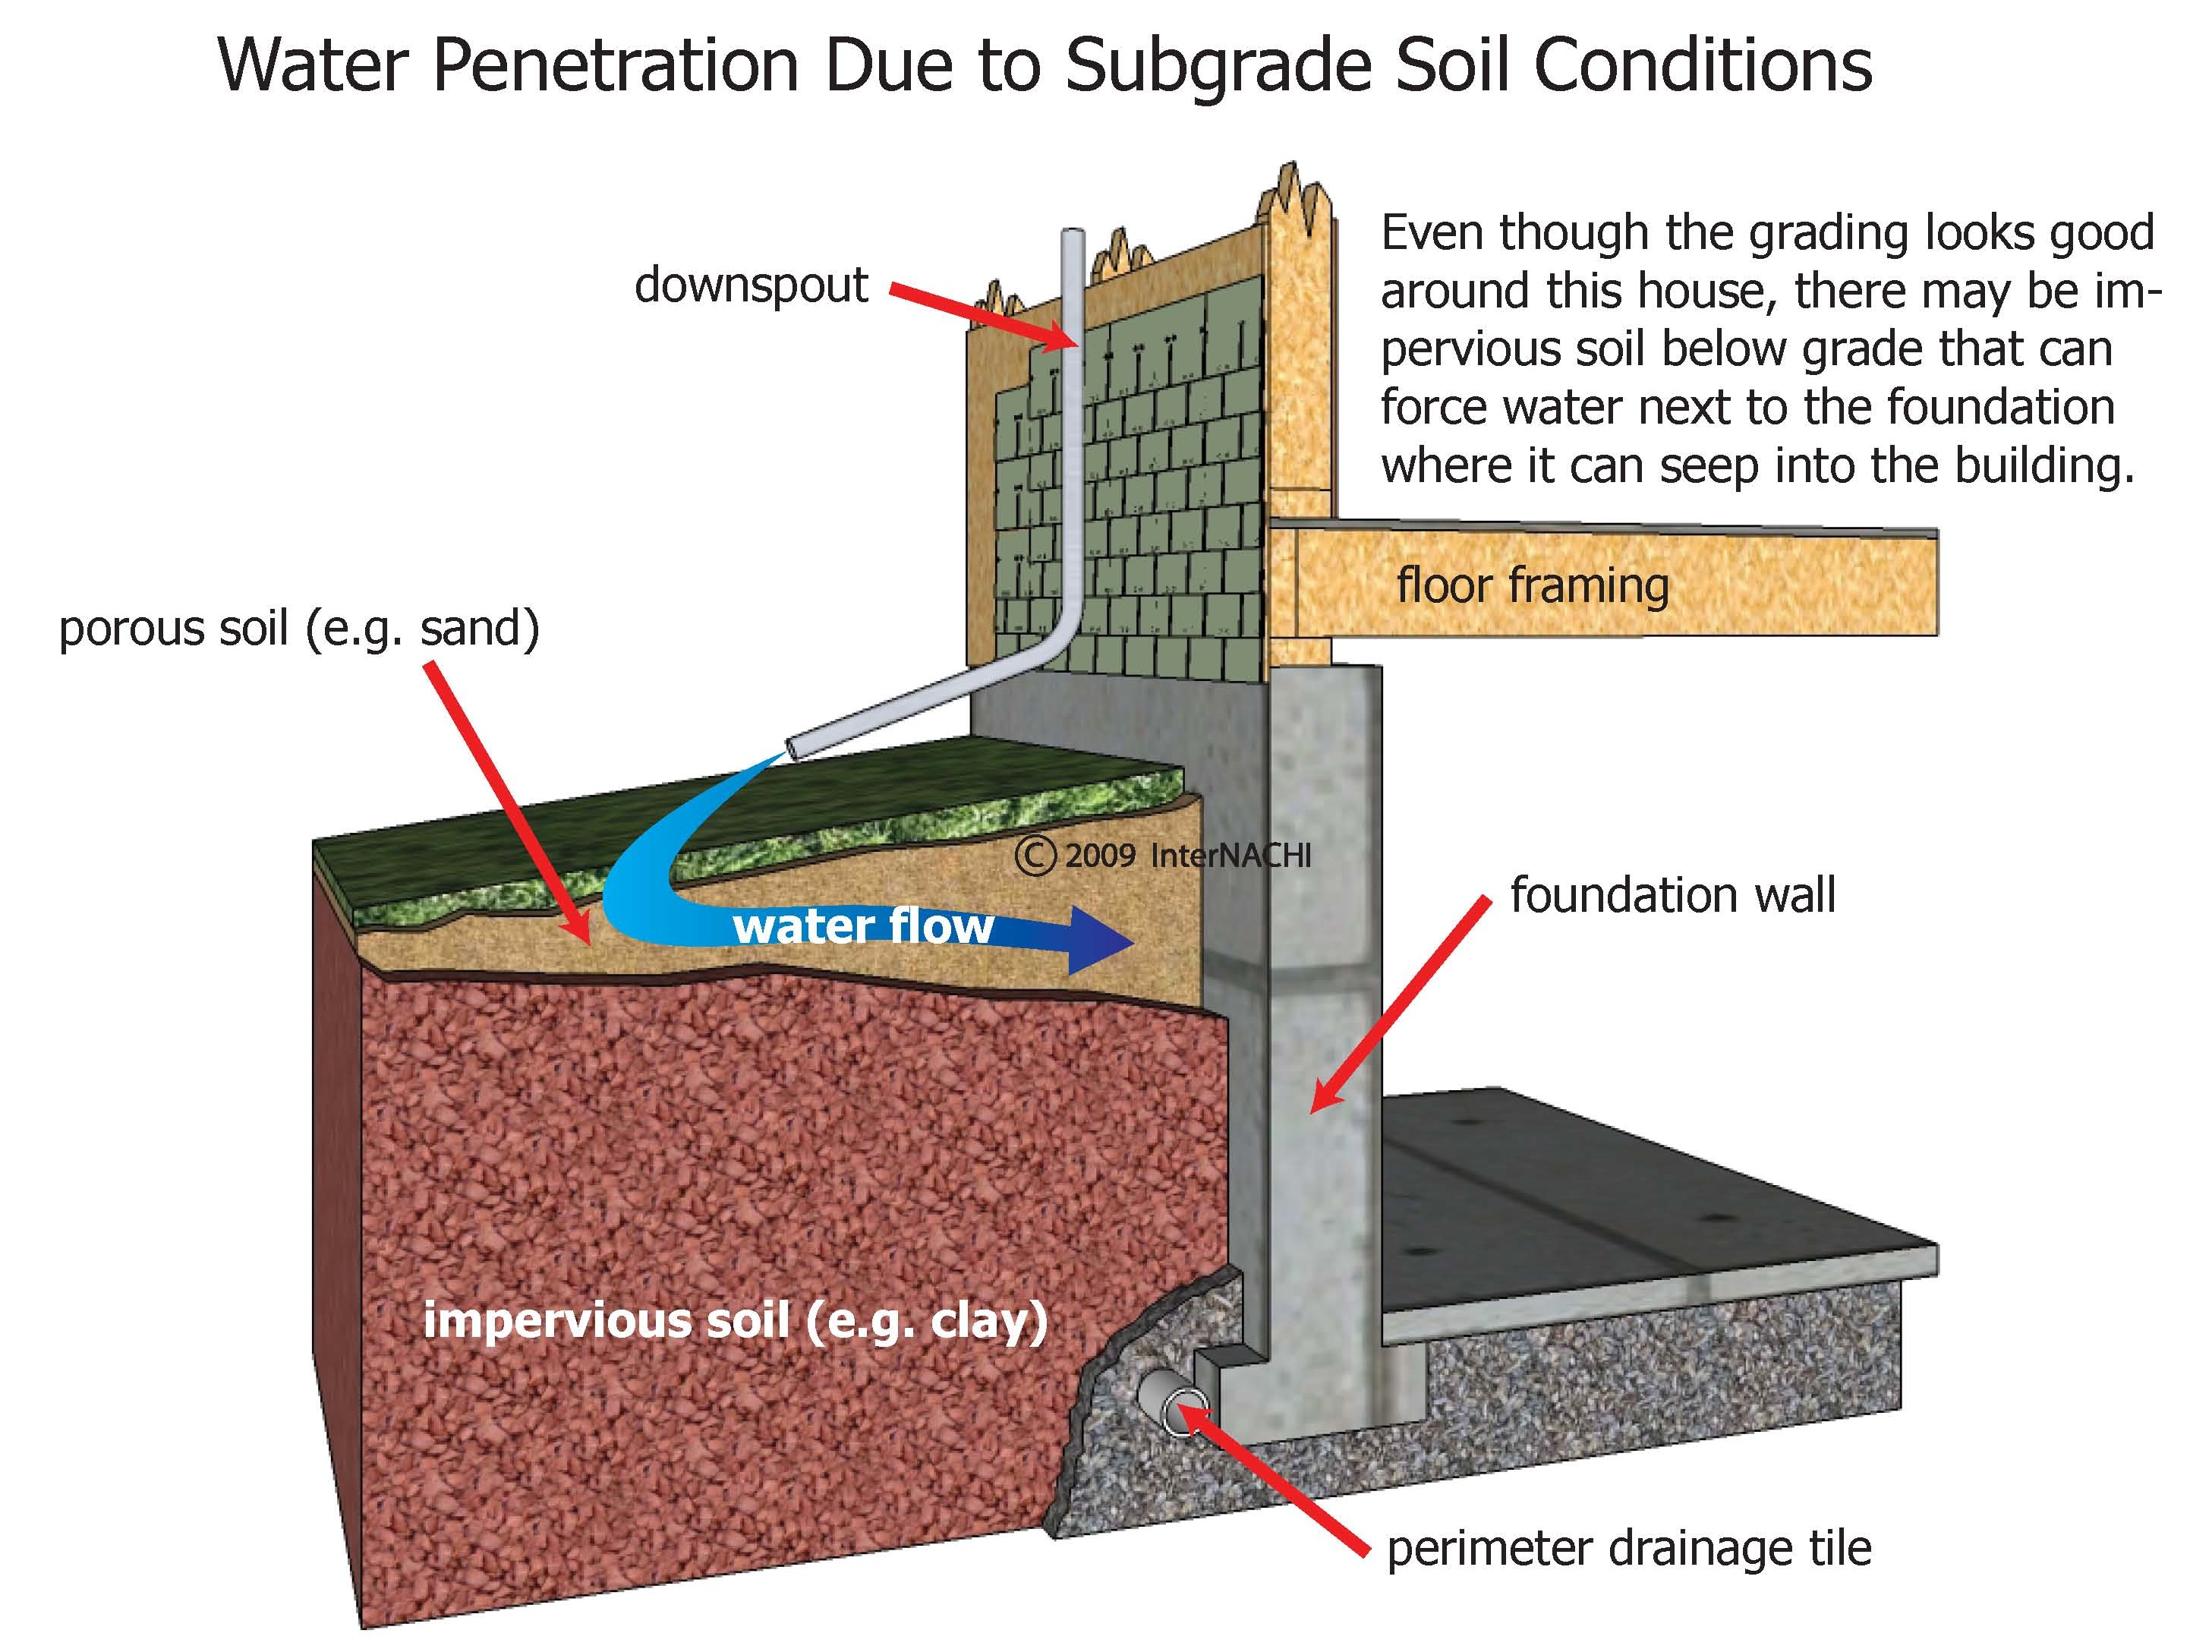 /uploads/images/hinh-anh/water-penetration-soil-conditions.jpg